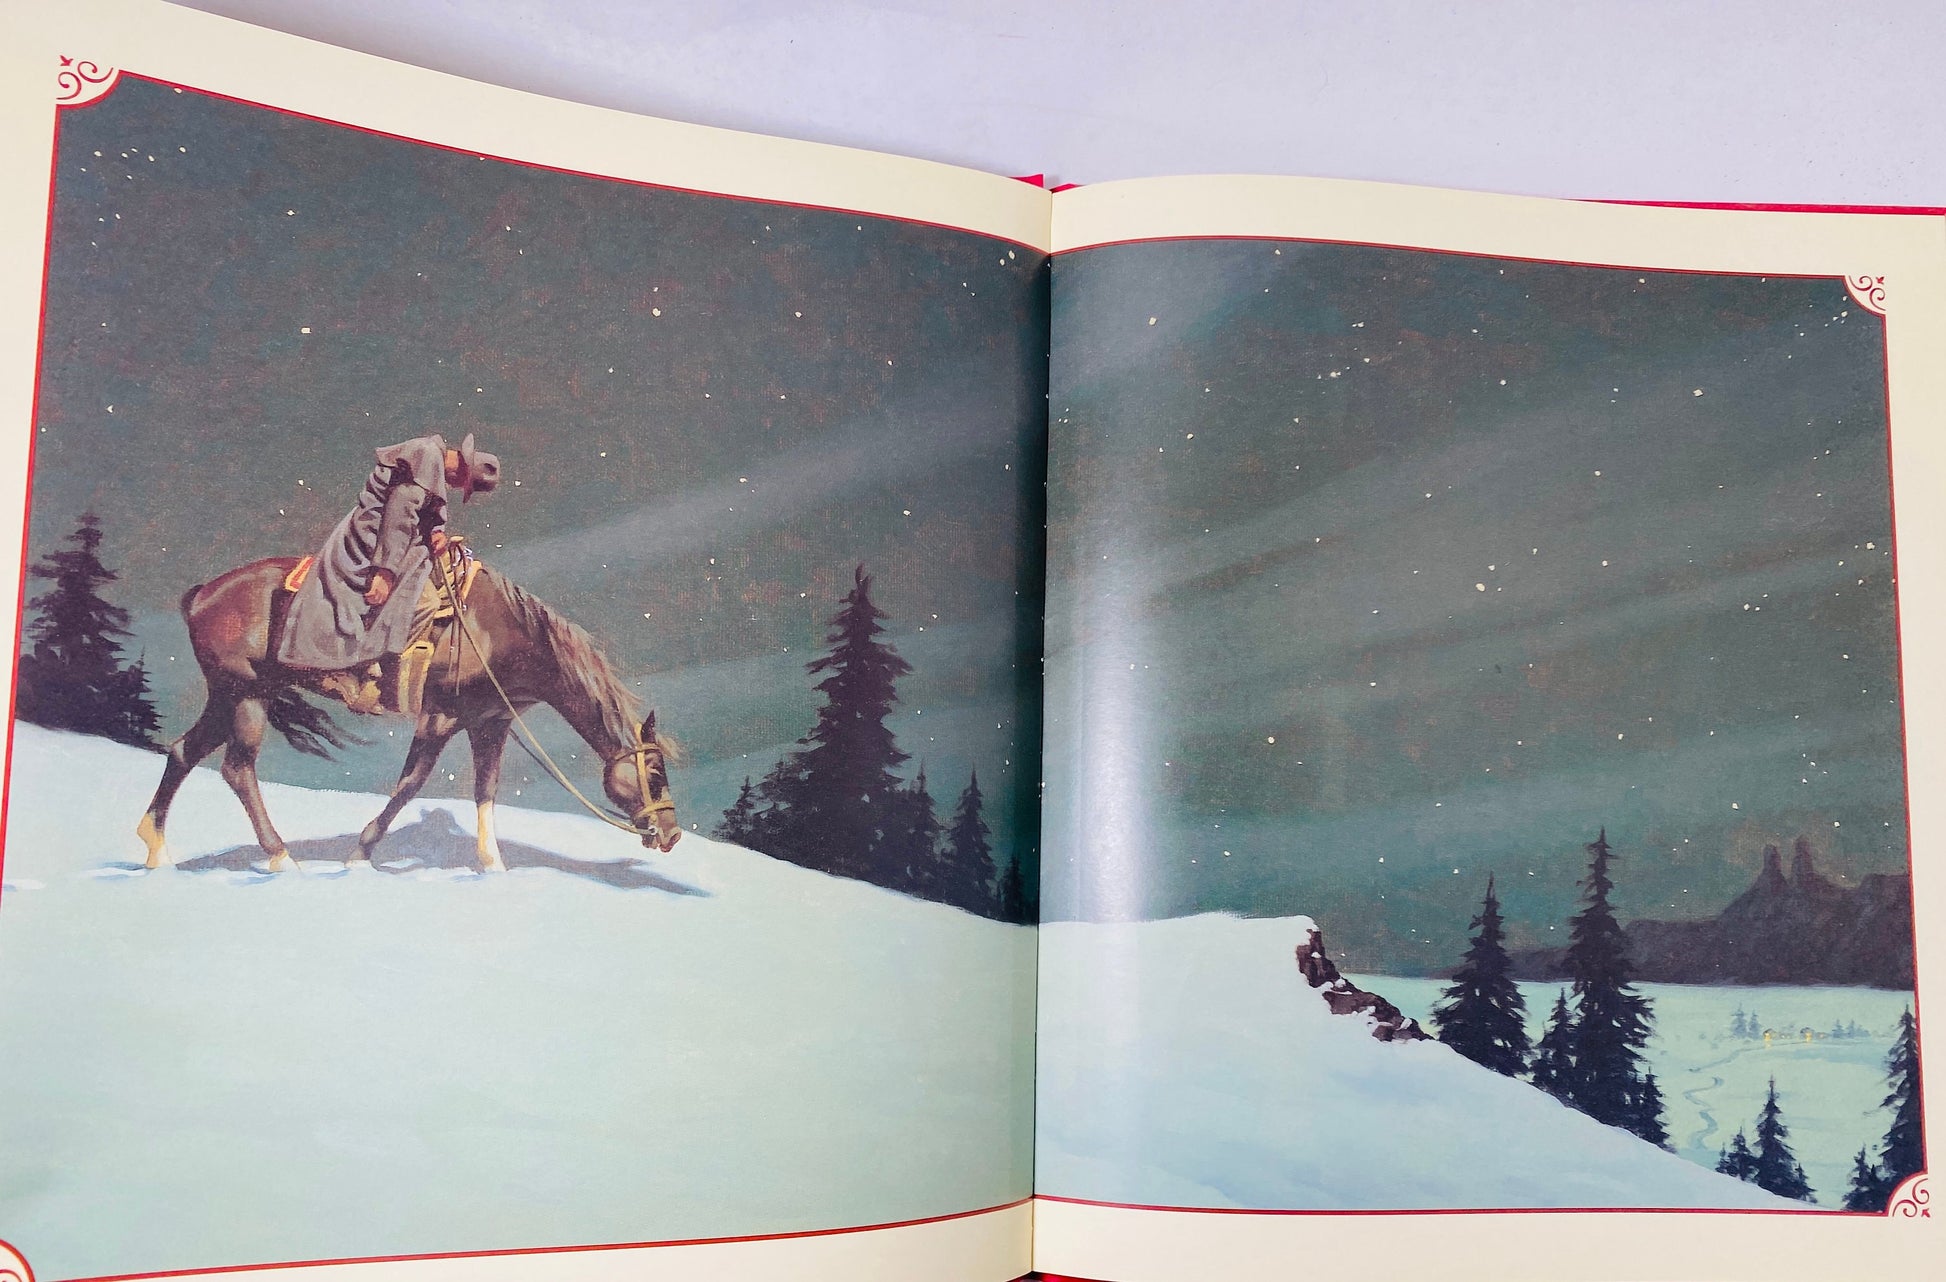 Cowboy Christmas FIRST EDITION vintage children's book circa 2000 Lone Star reading gift Stocking stuffer